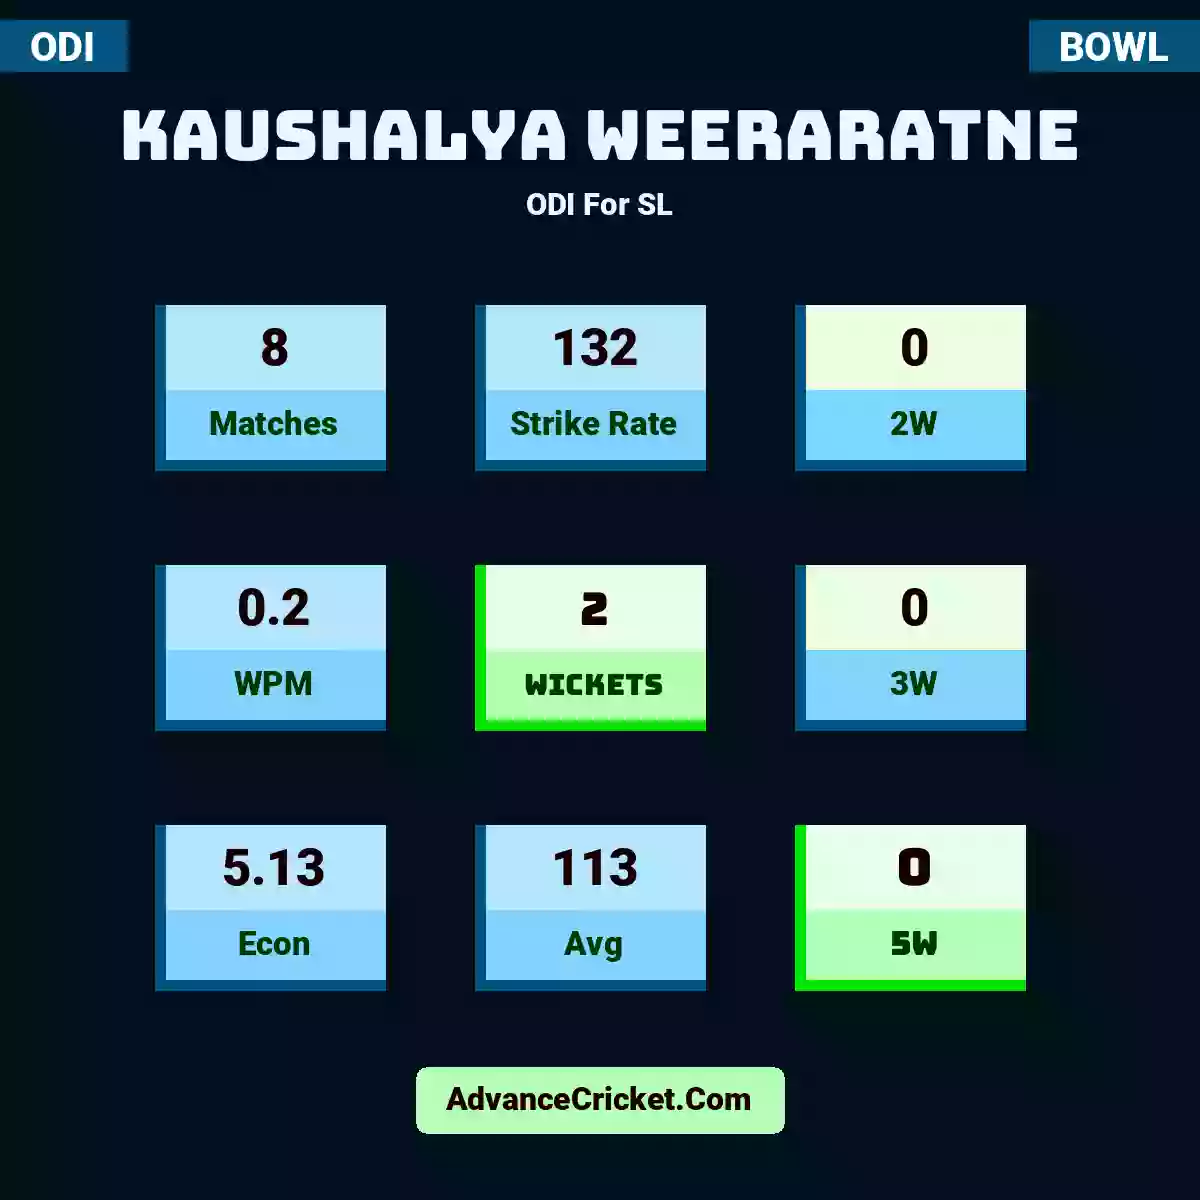 Kaushalya Weeraratne ODI  For SL, Kaushalya Weeraratne played 8 match in this ODI mode, with a SR of 132. K.Weeraratne took 0 2W, with a WPM of 0.2. Kaushalya Weeraratne secured 2 wickets, including 0 3W hauls, with an Econ of 5.13 and Avg of 113. Additionally, K.Weeraratne achieved 0 5W hauls.